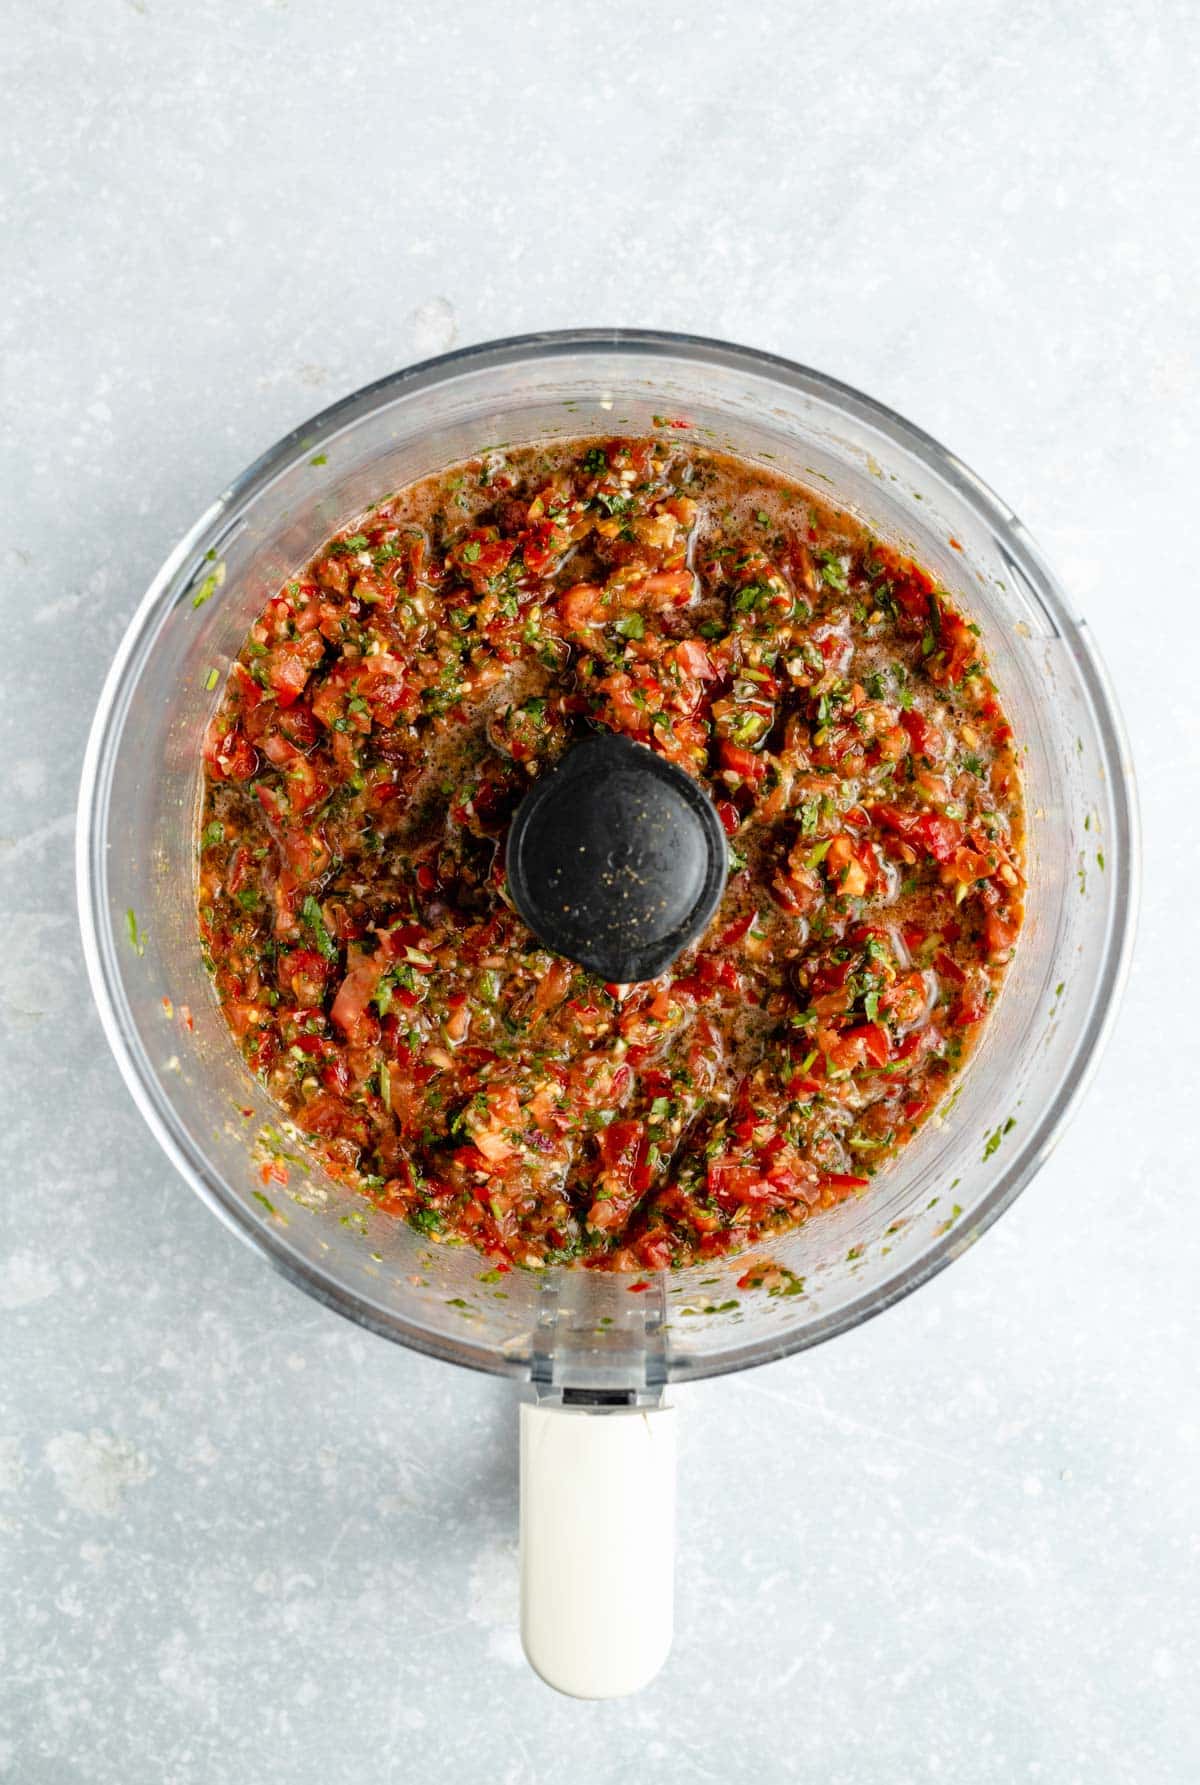 How Long Can Salsa Sit Out At Room Temperature